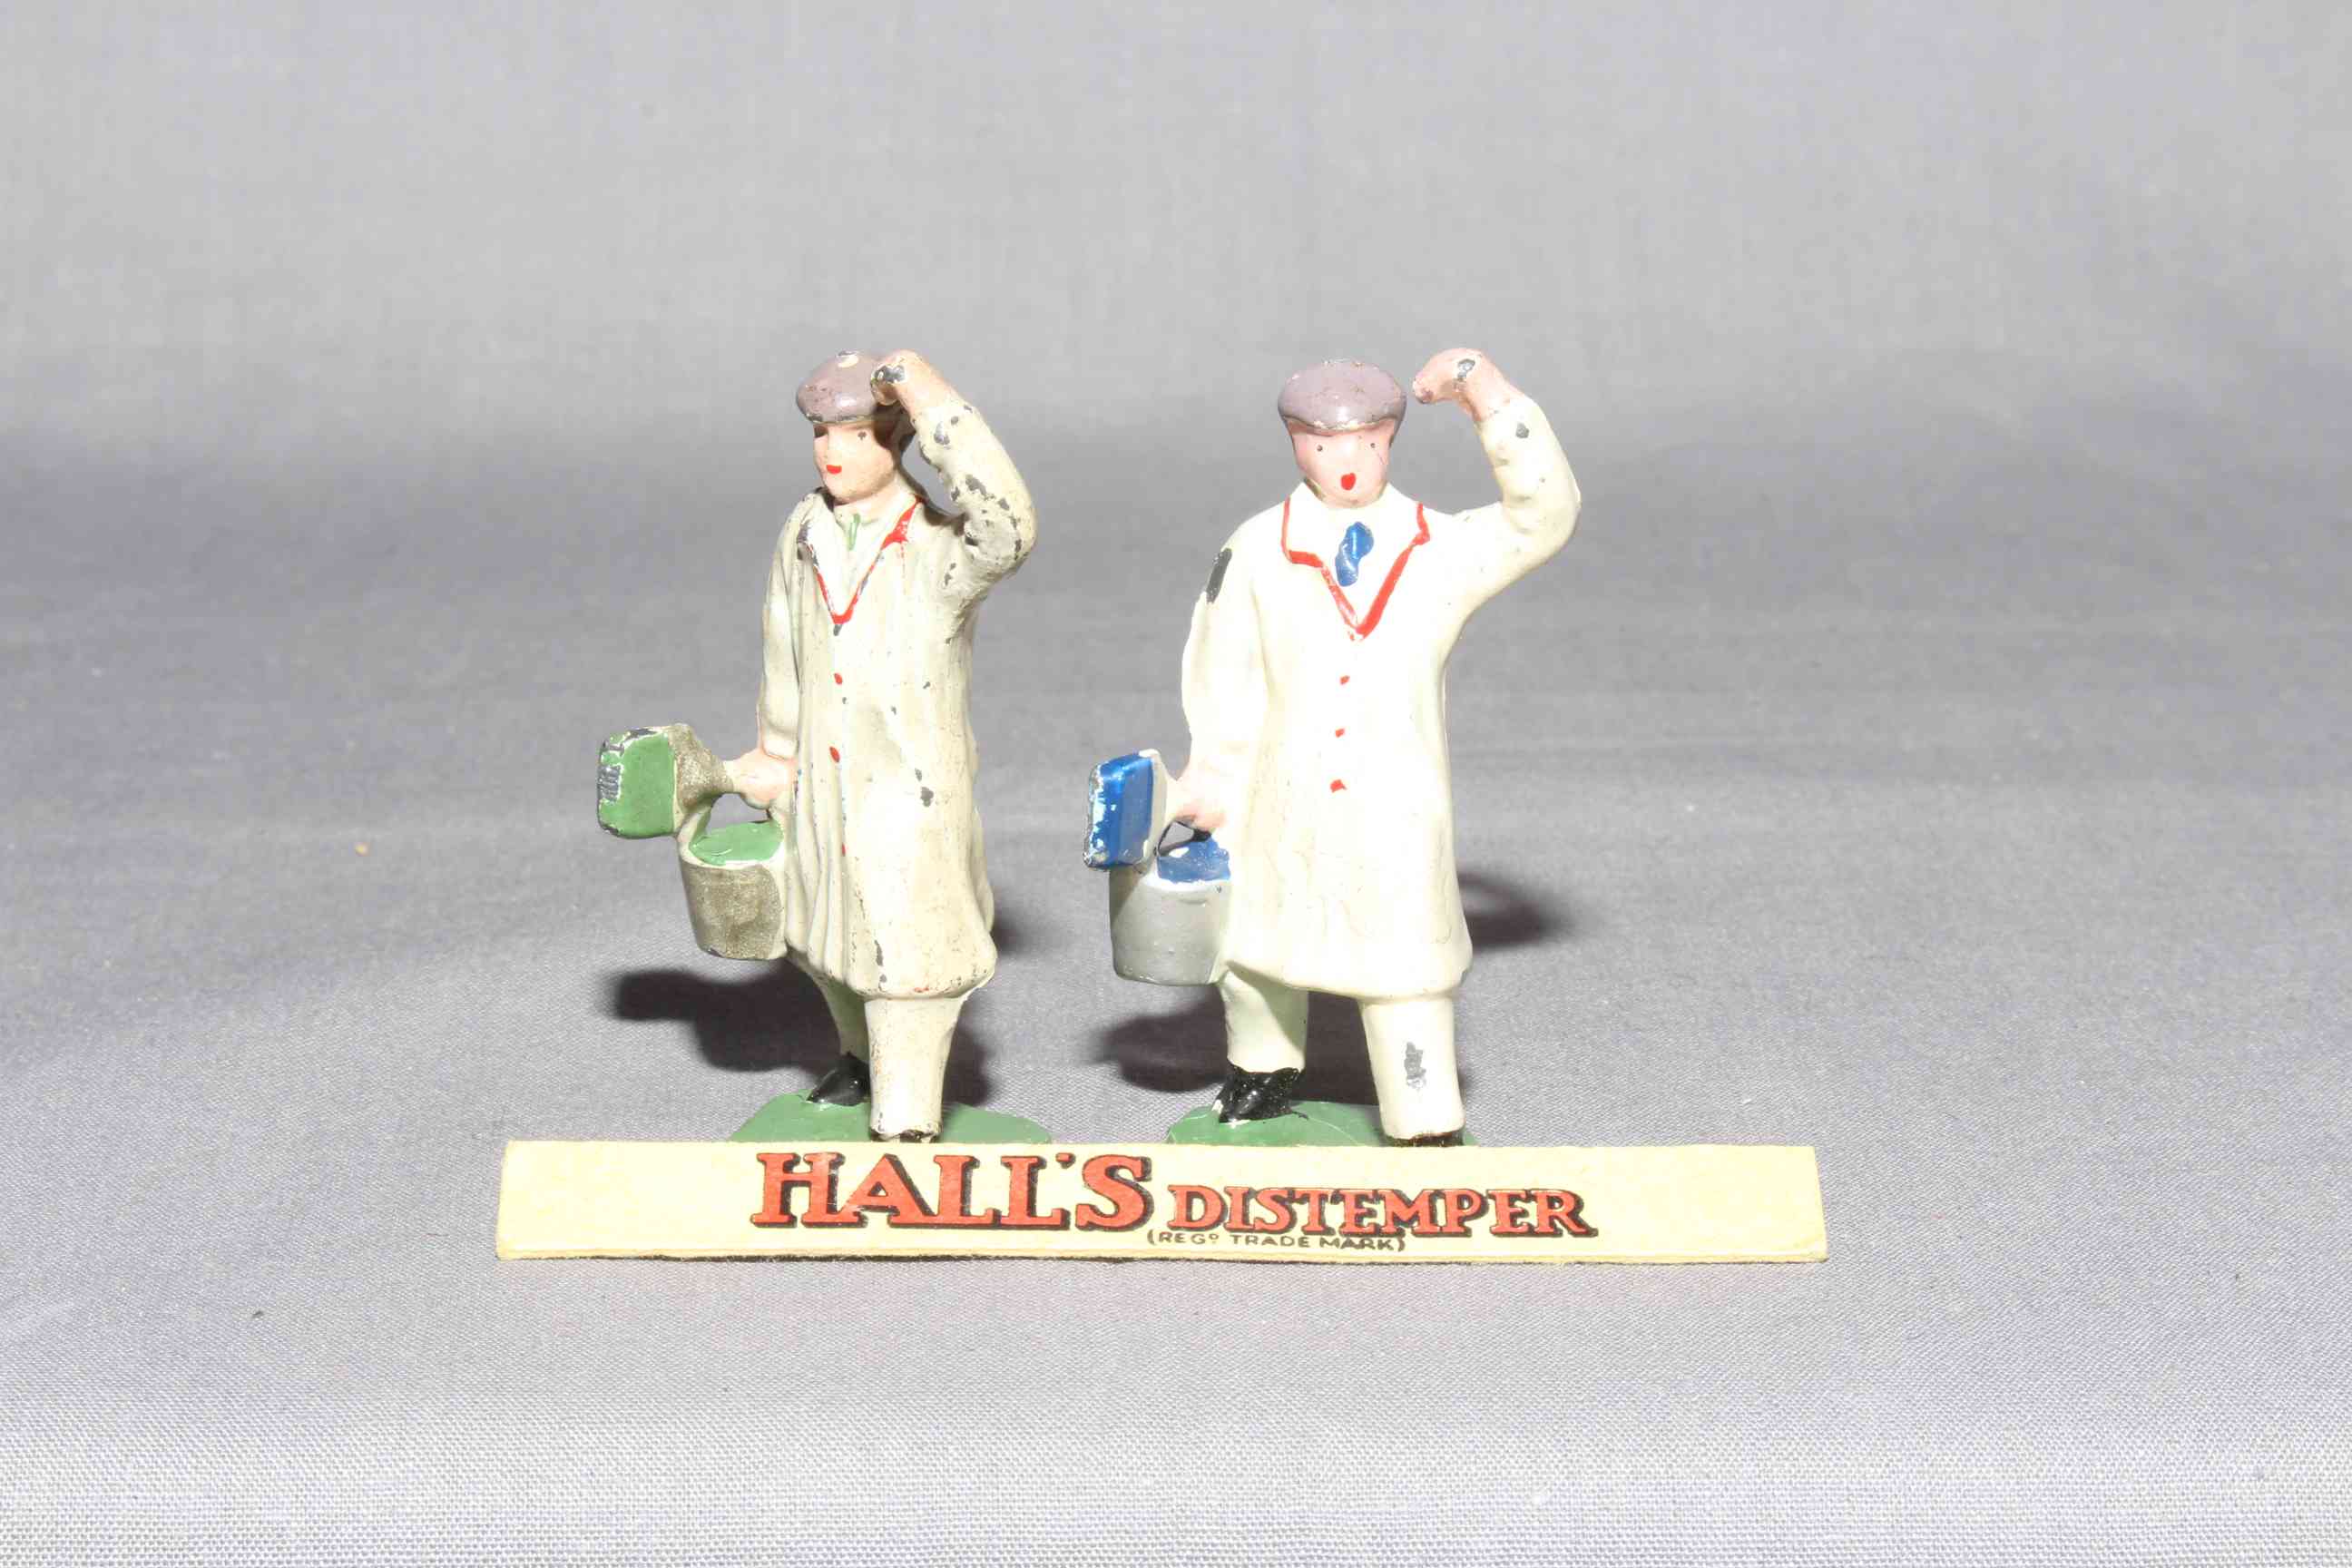 Hornby Series Hall Distemper Set. Excellent unboxed.